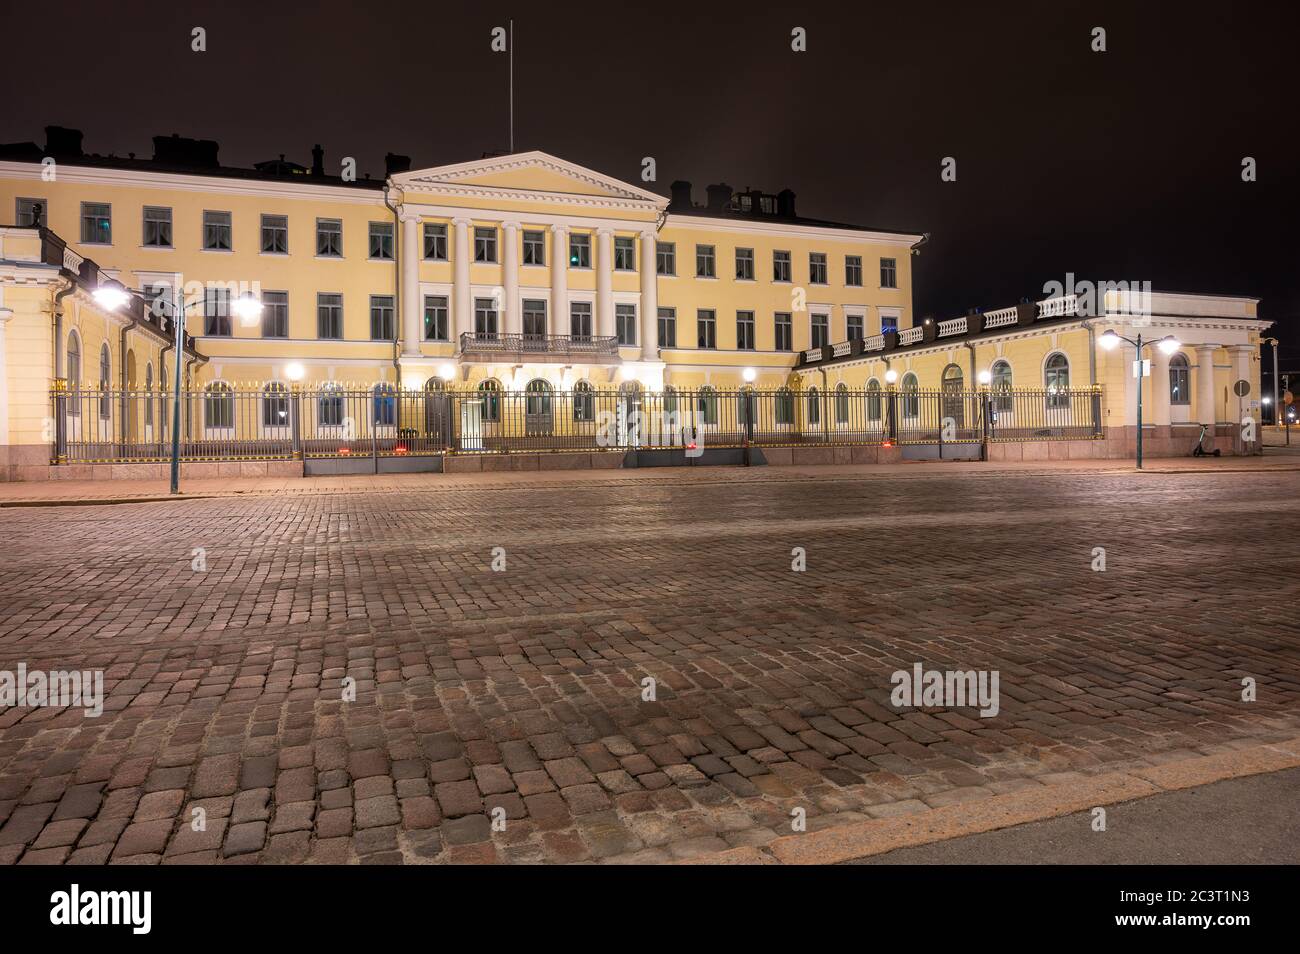 Helsinki / Finland - April 24, 2020: Finnish presidential palace in downtown Helsinki, next to Market Square, photographed during night time. Stock Photo